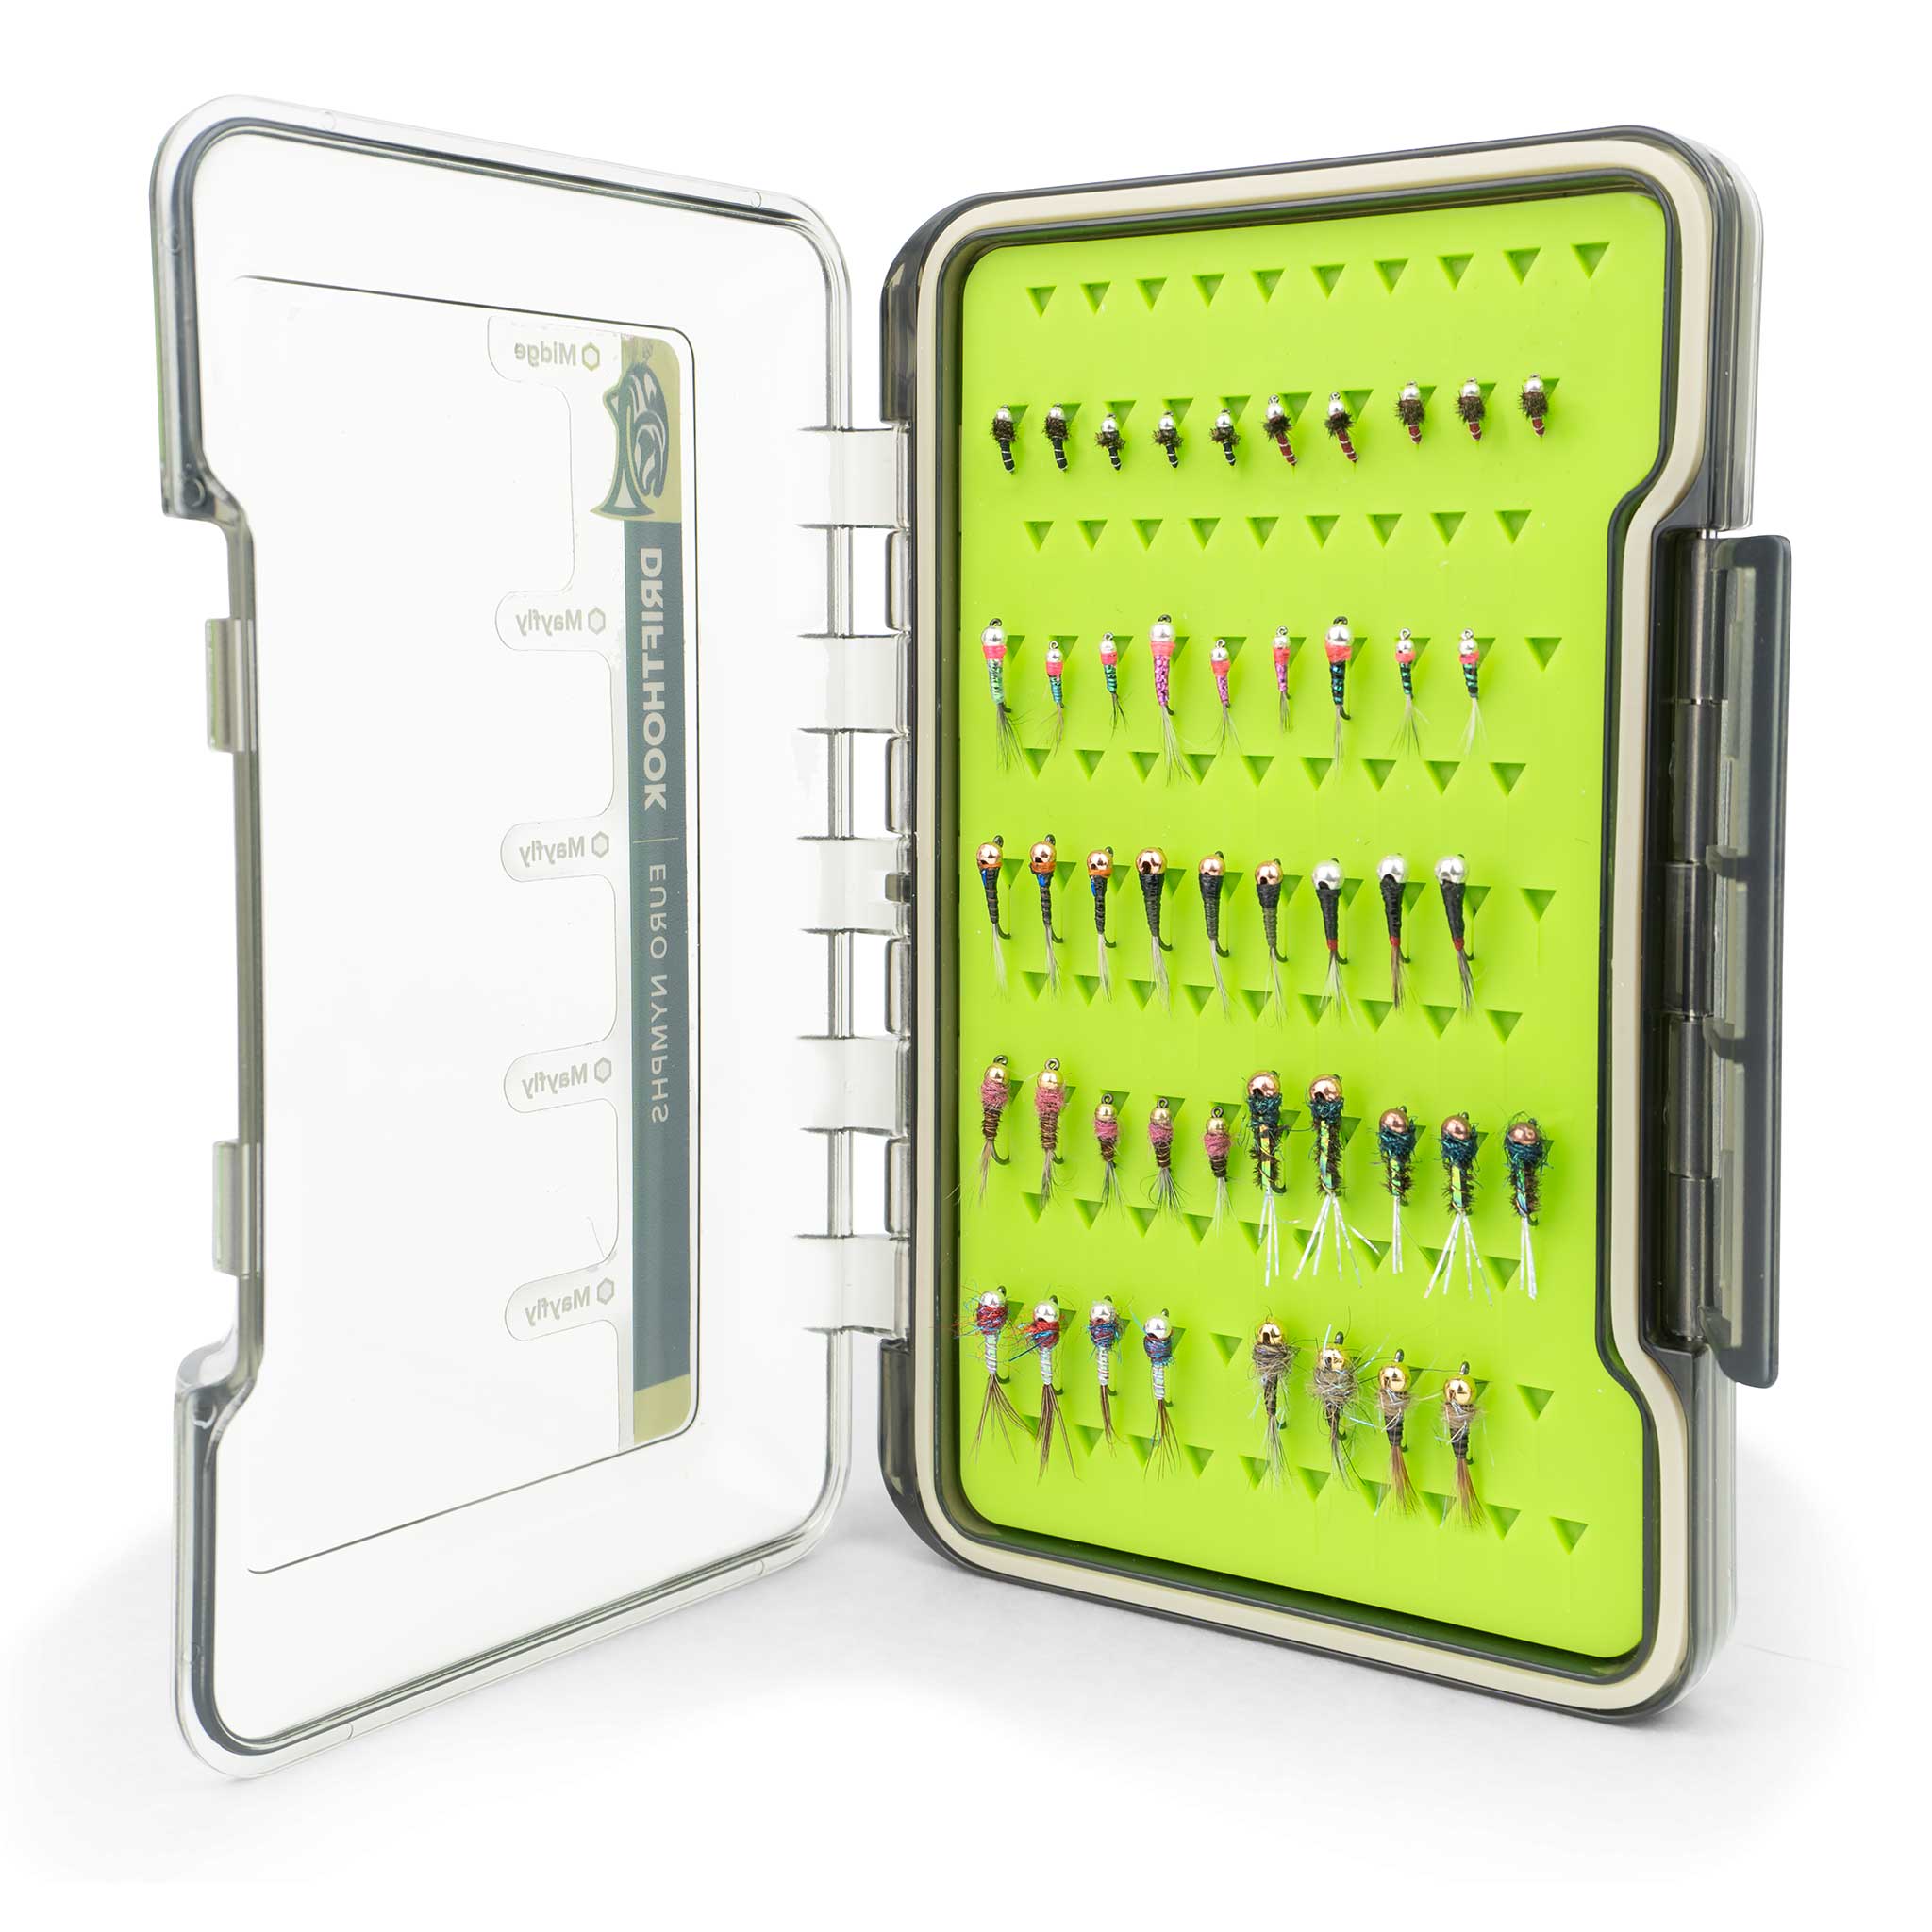 Best Fly Fishing Starter Kit with Free Shipping